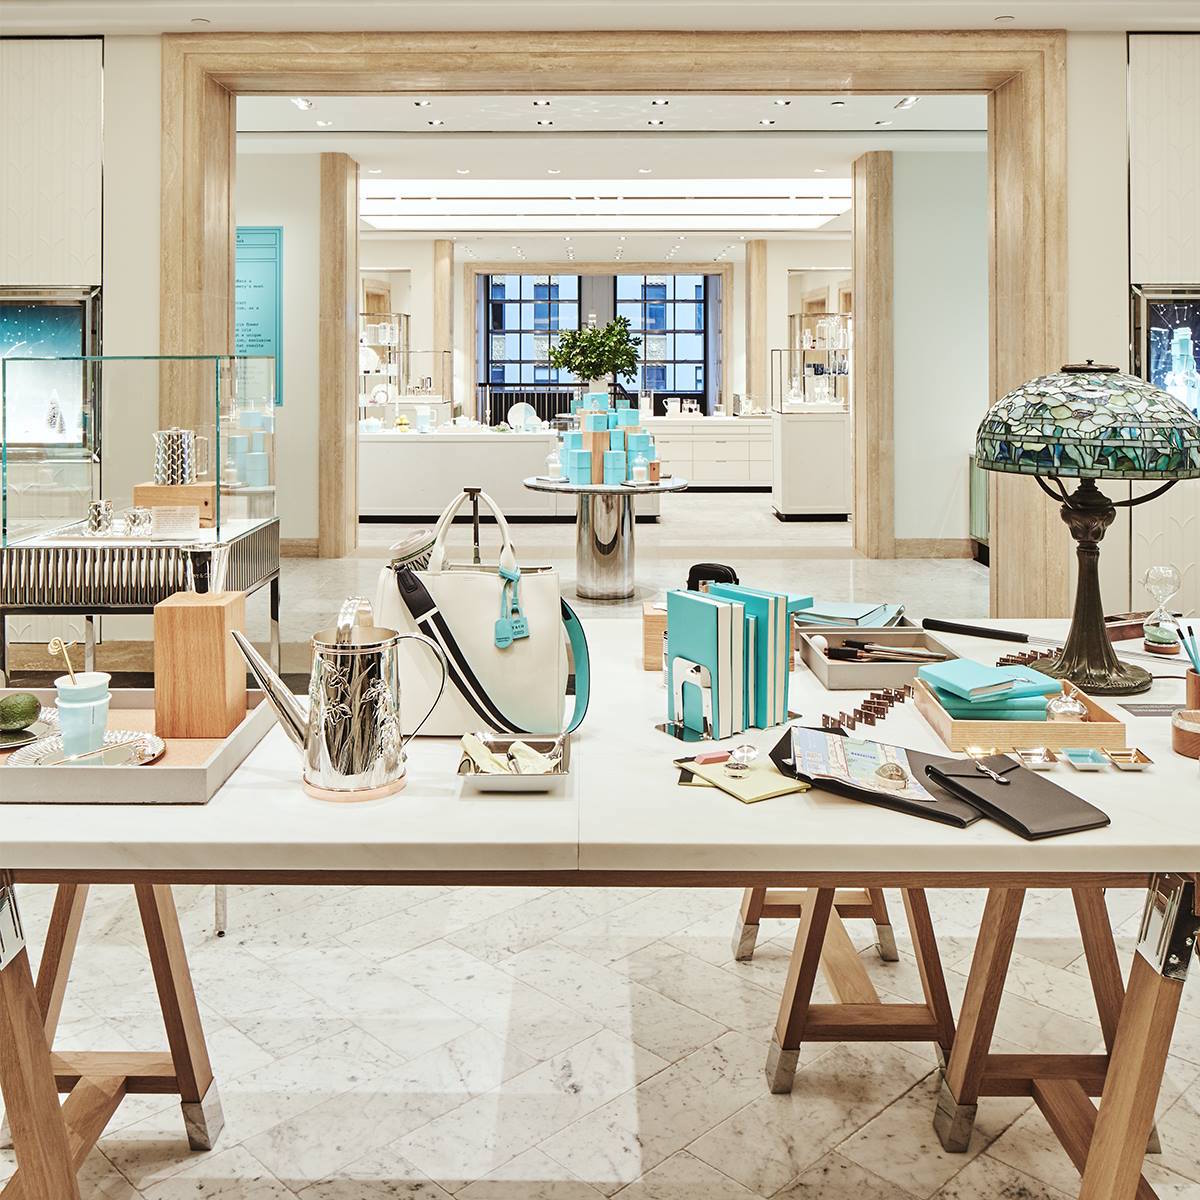 The new home and accessories floor at Tiffany's New York flagship